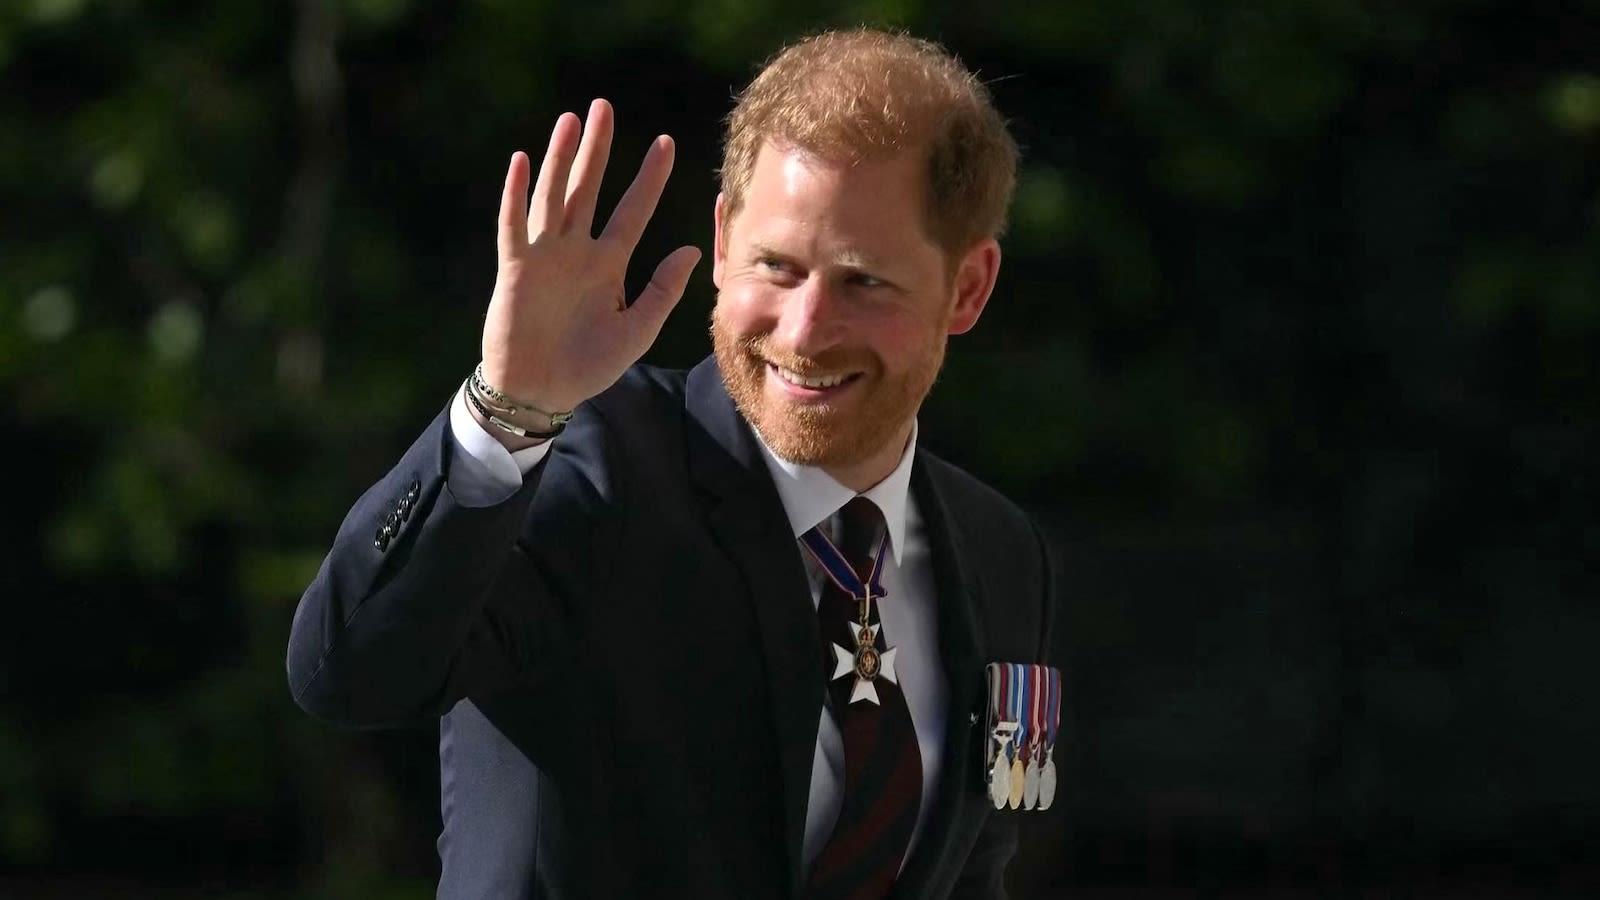 Prince Harry steps out solo in London while King Charles III attends Buckingham Palace garden party